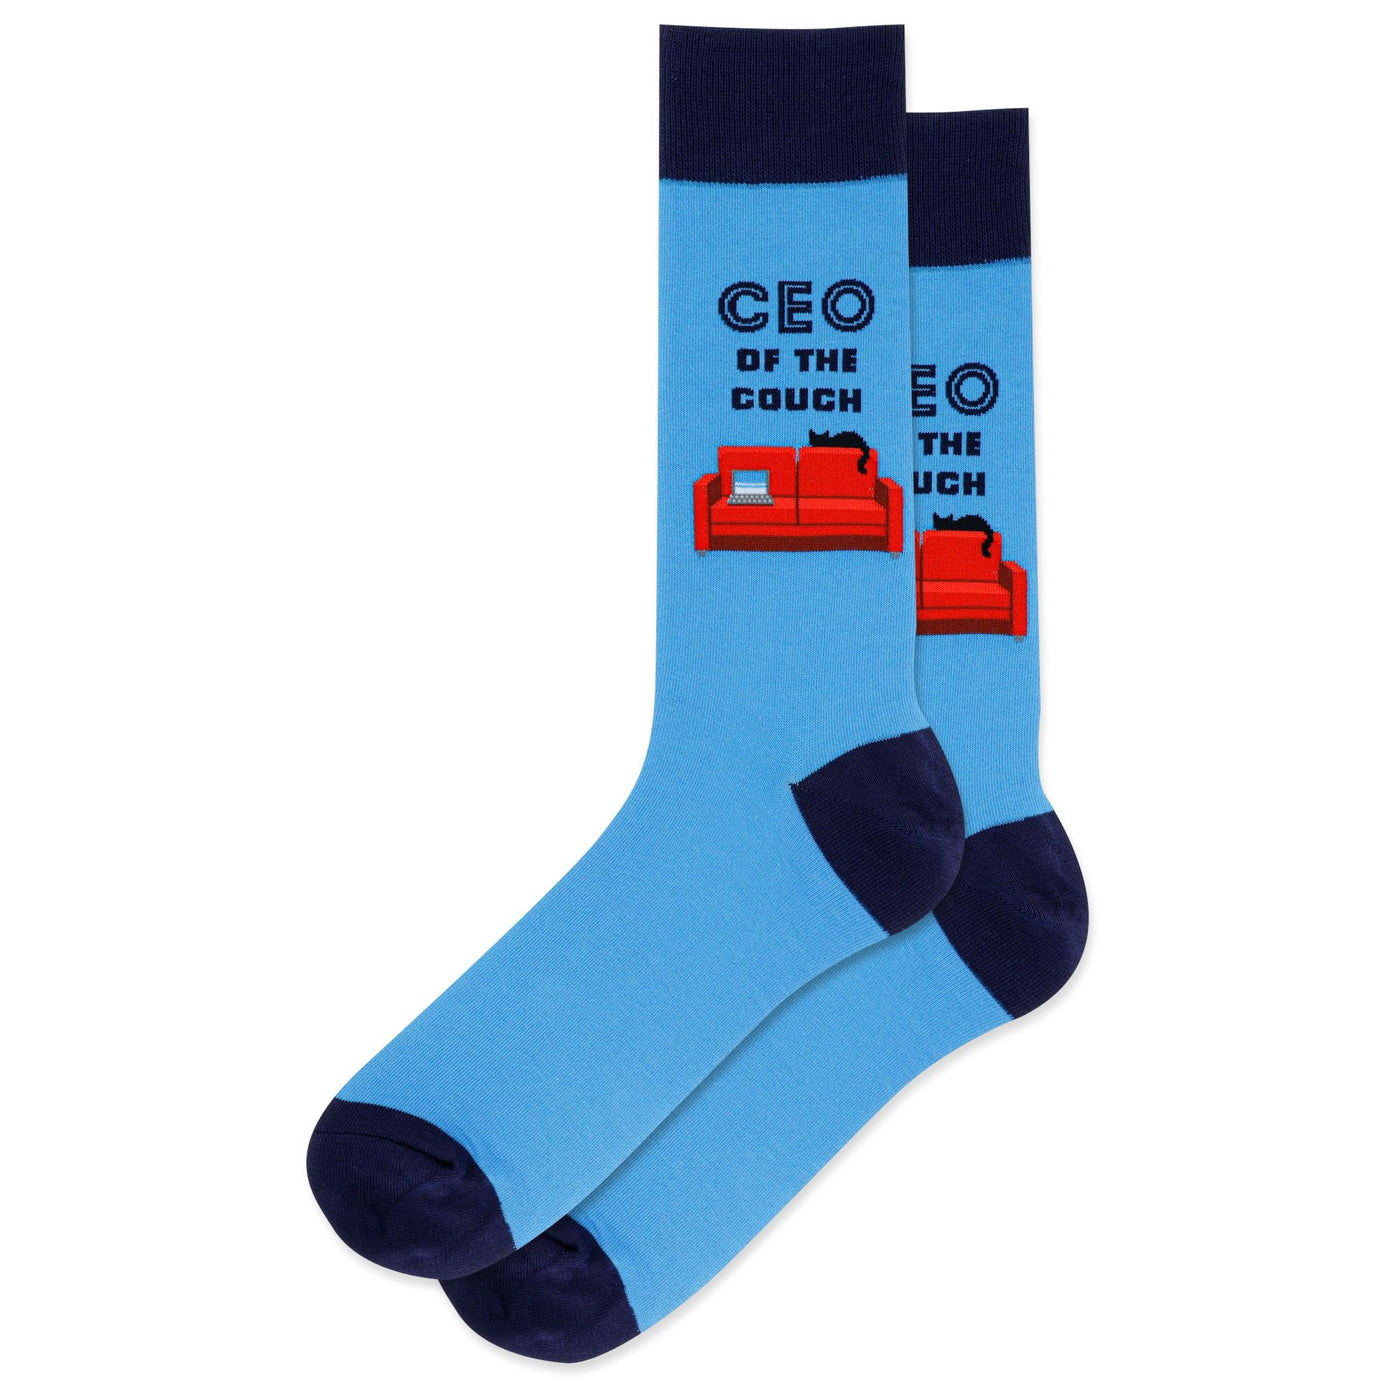 CEO of the Couch Crew Socks | Men's - Knock Your Socks Off